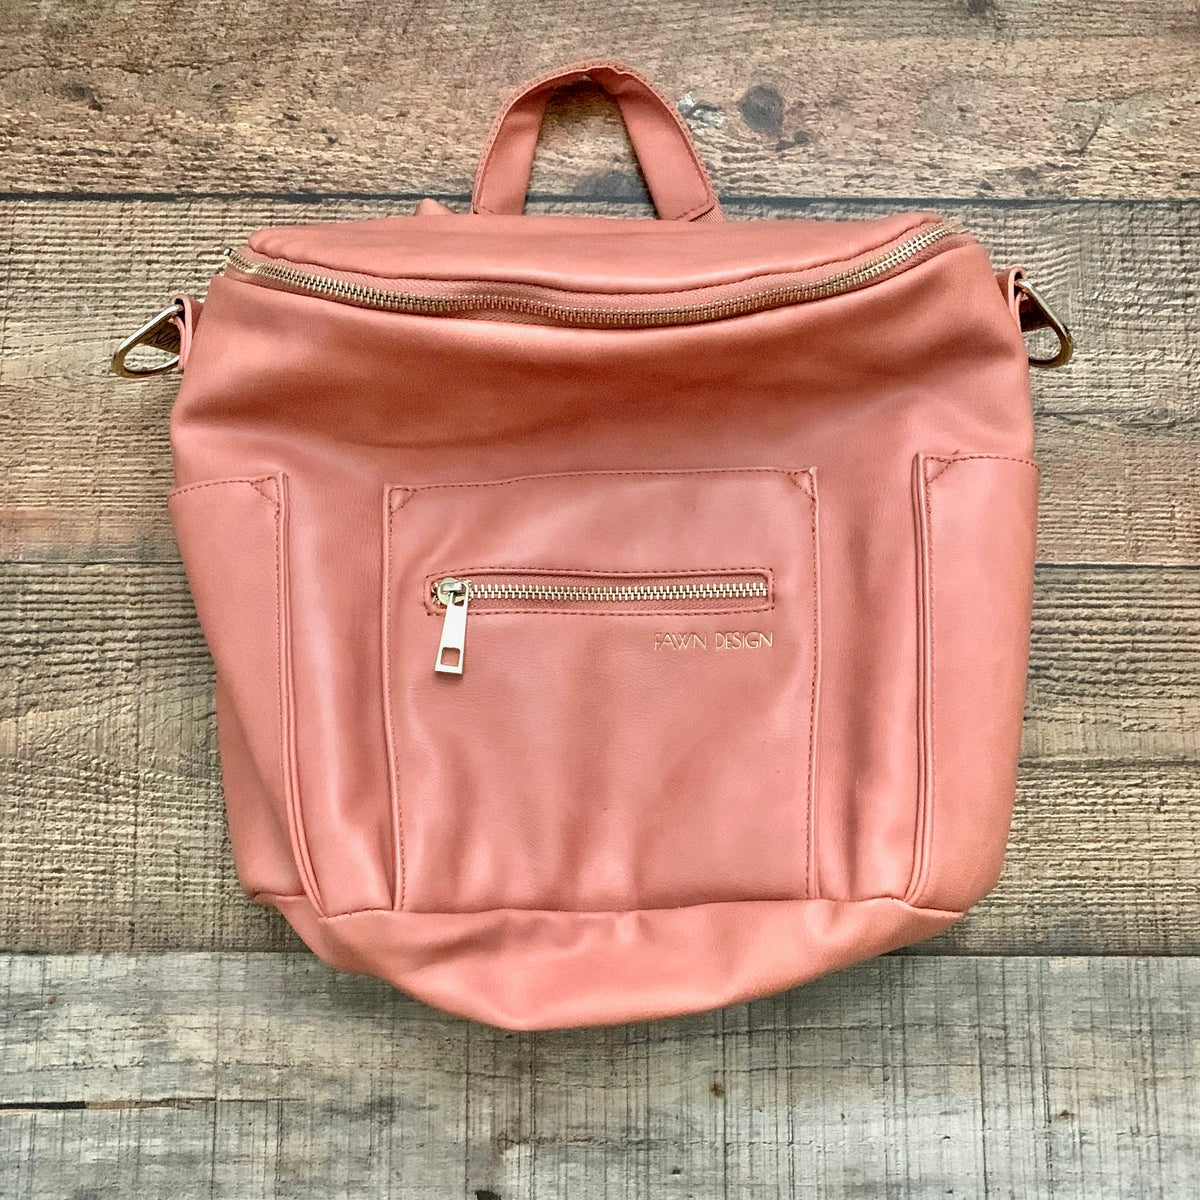 New Pink Fawn Design Diaper Bag, Baby